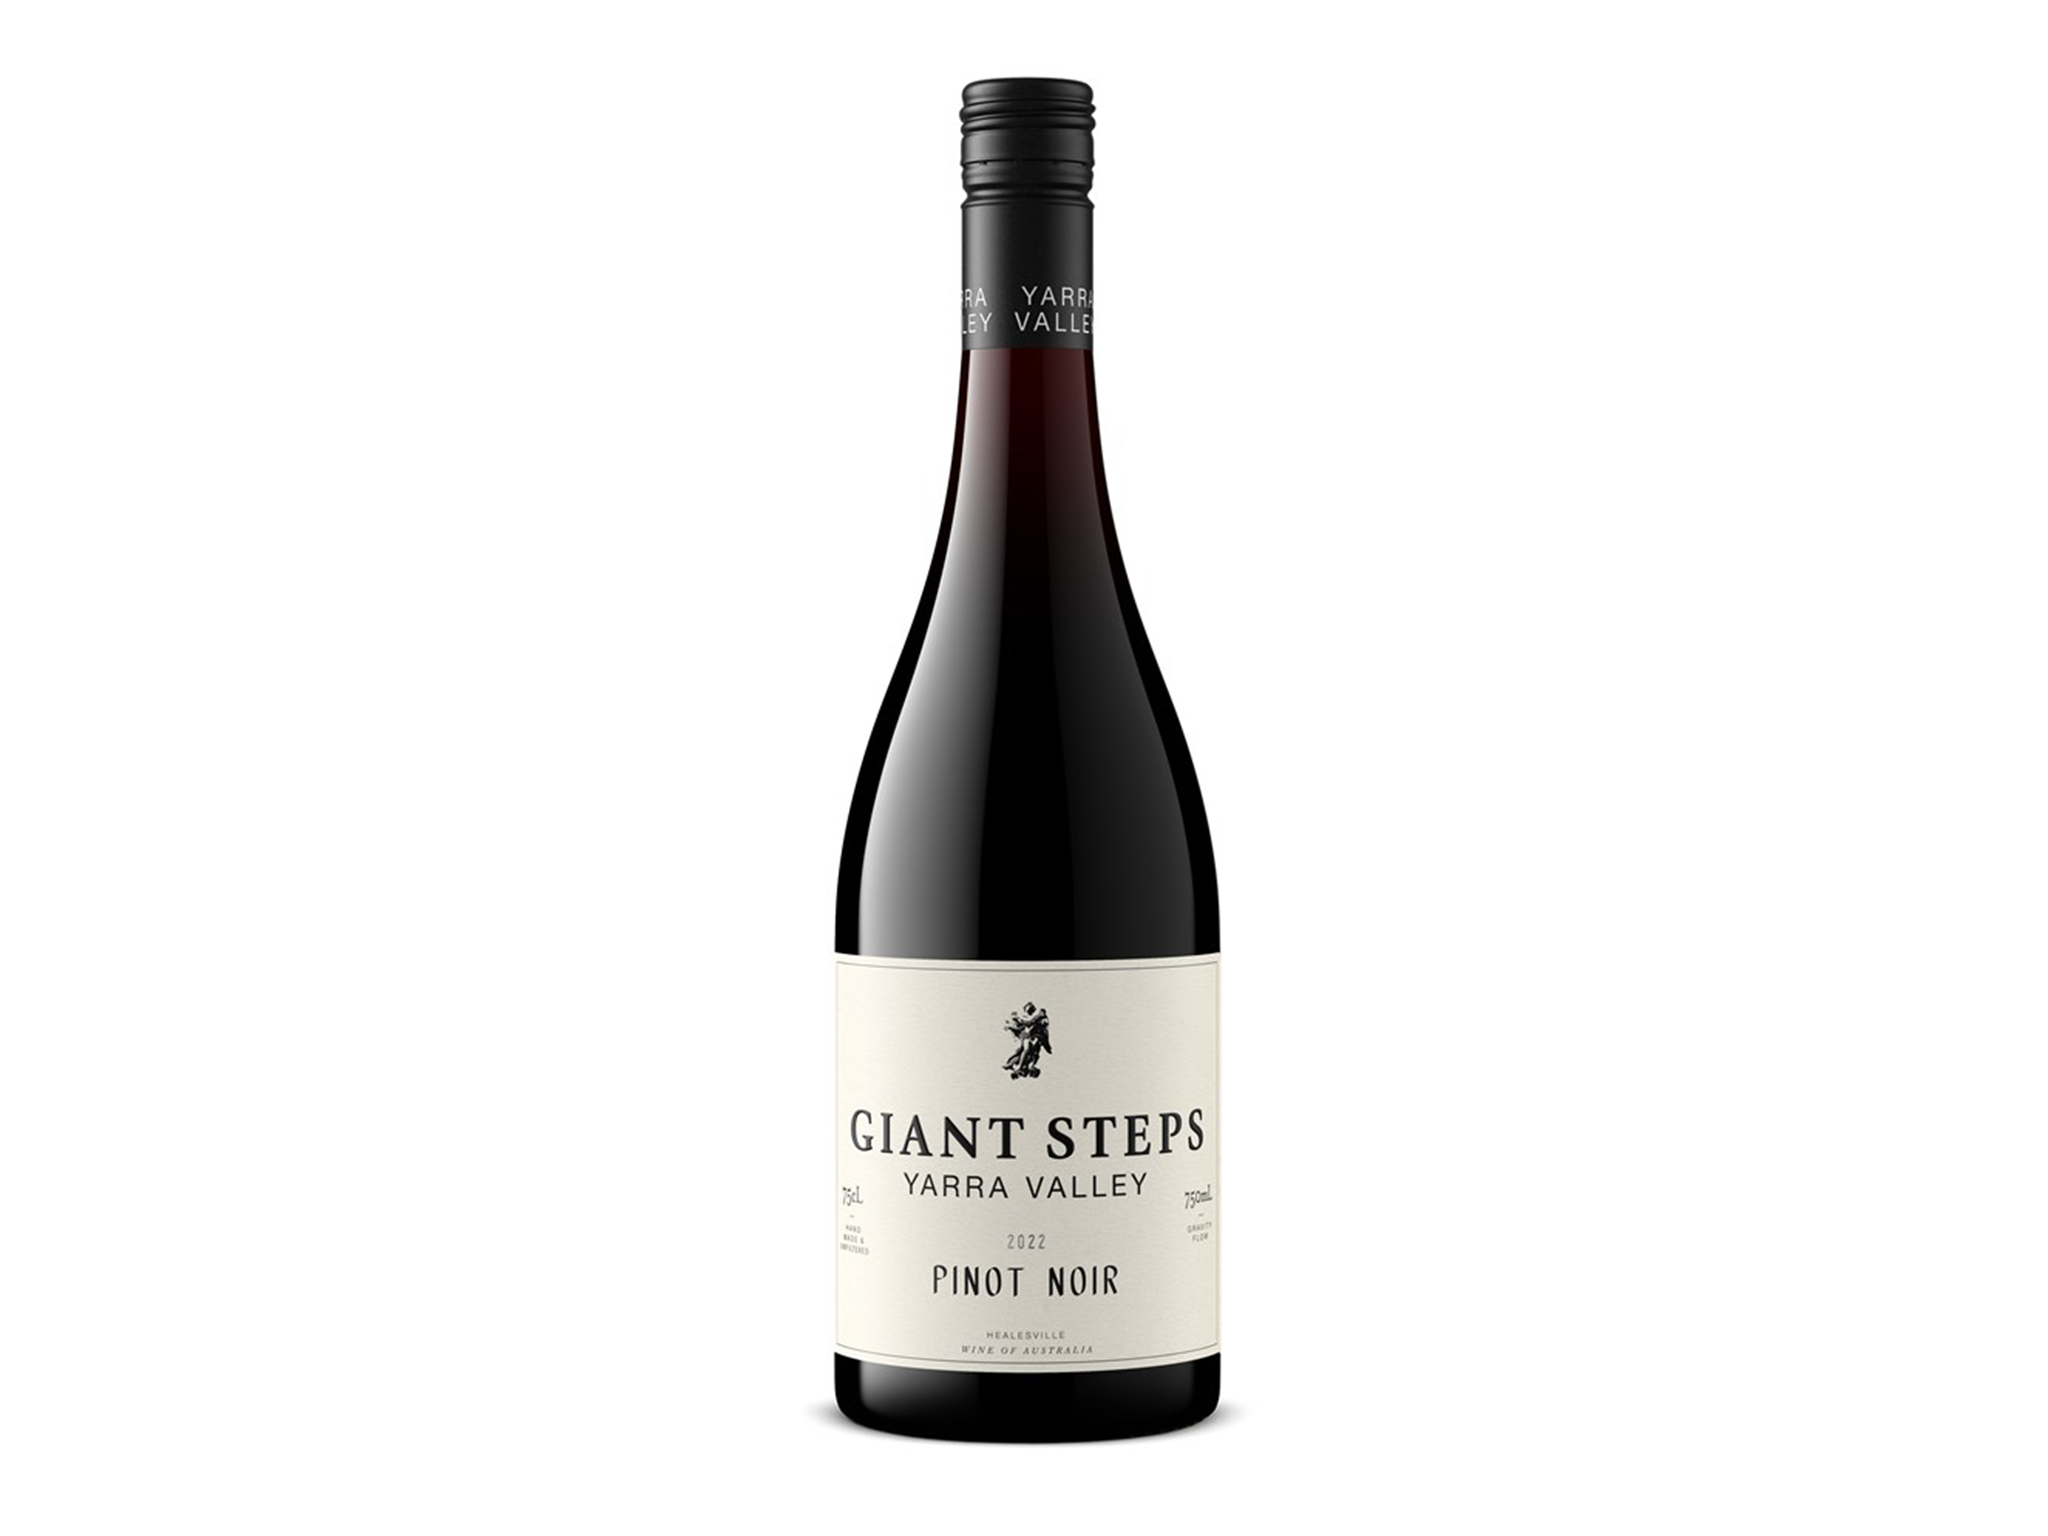 Giant Steps Yarra Valley pinot noir 2018